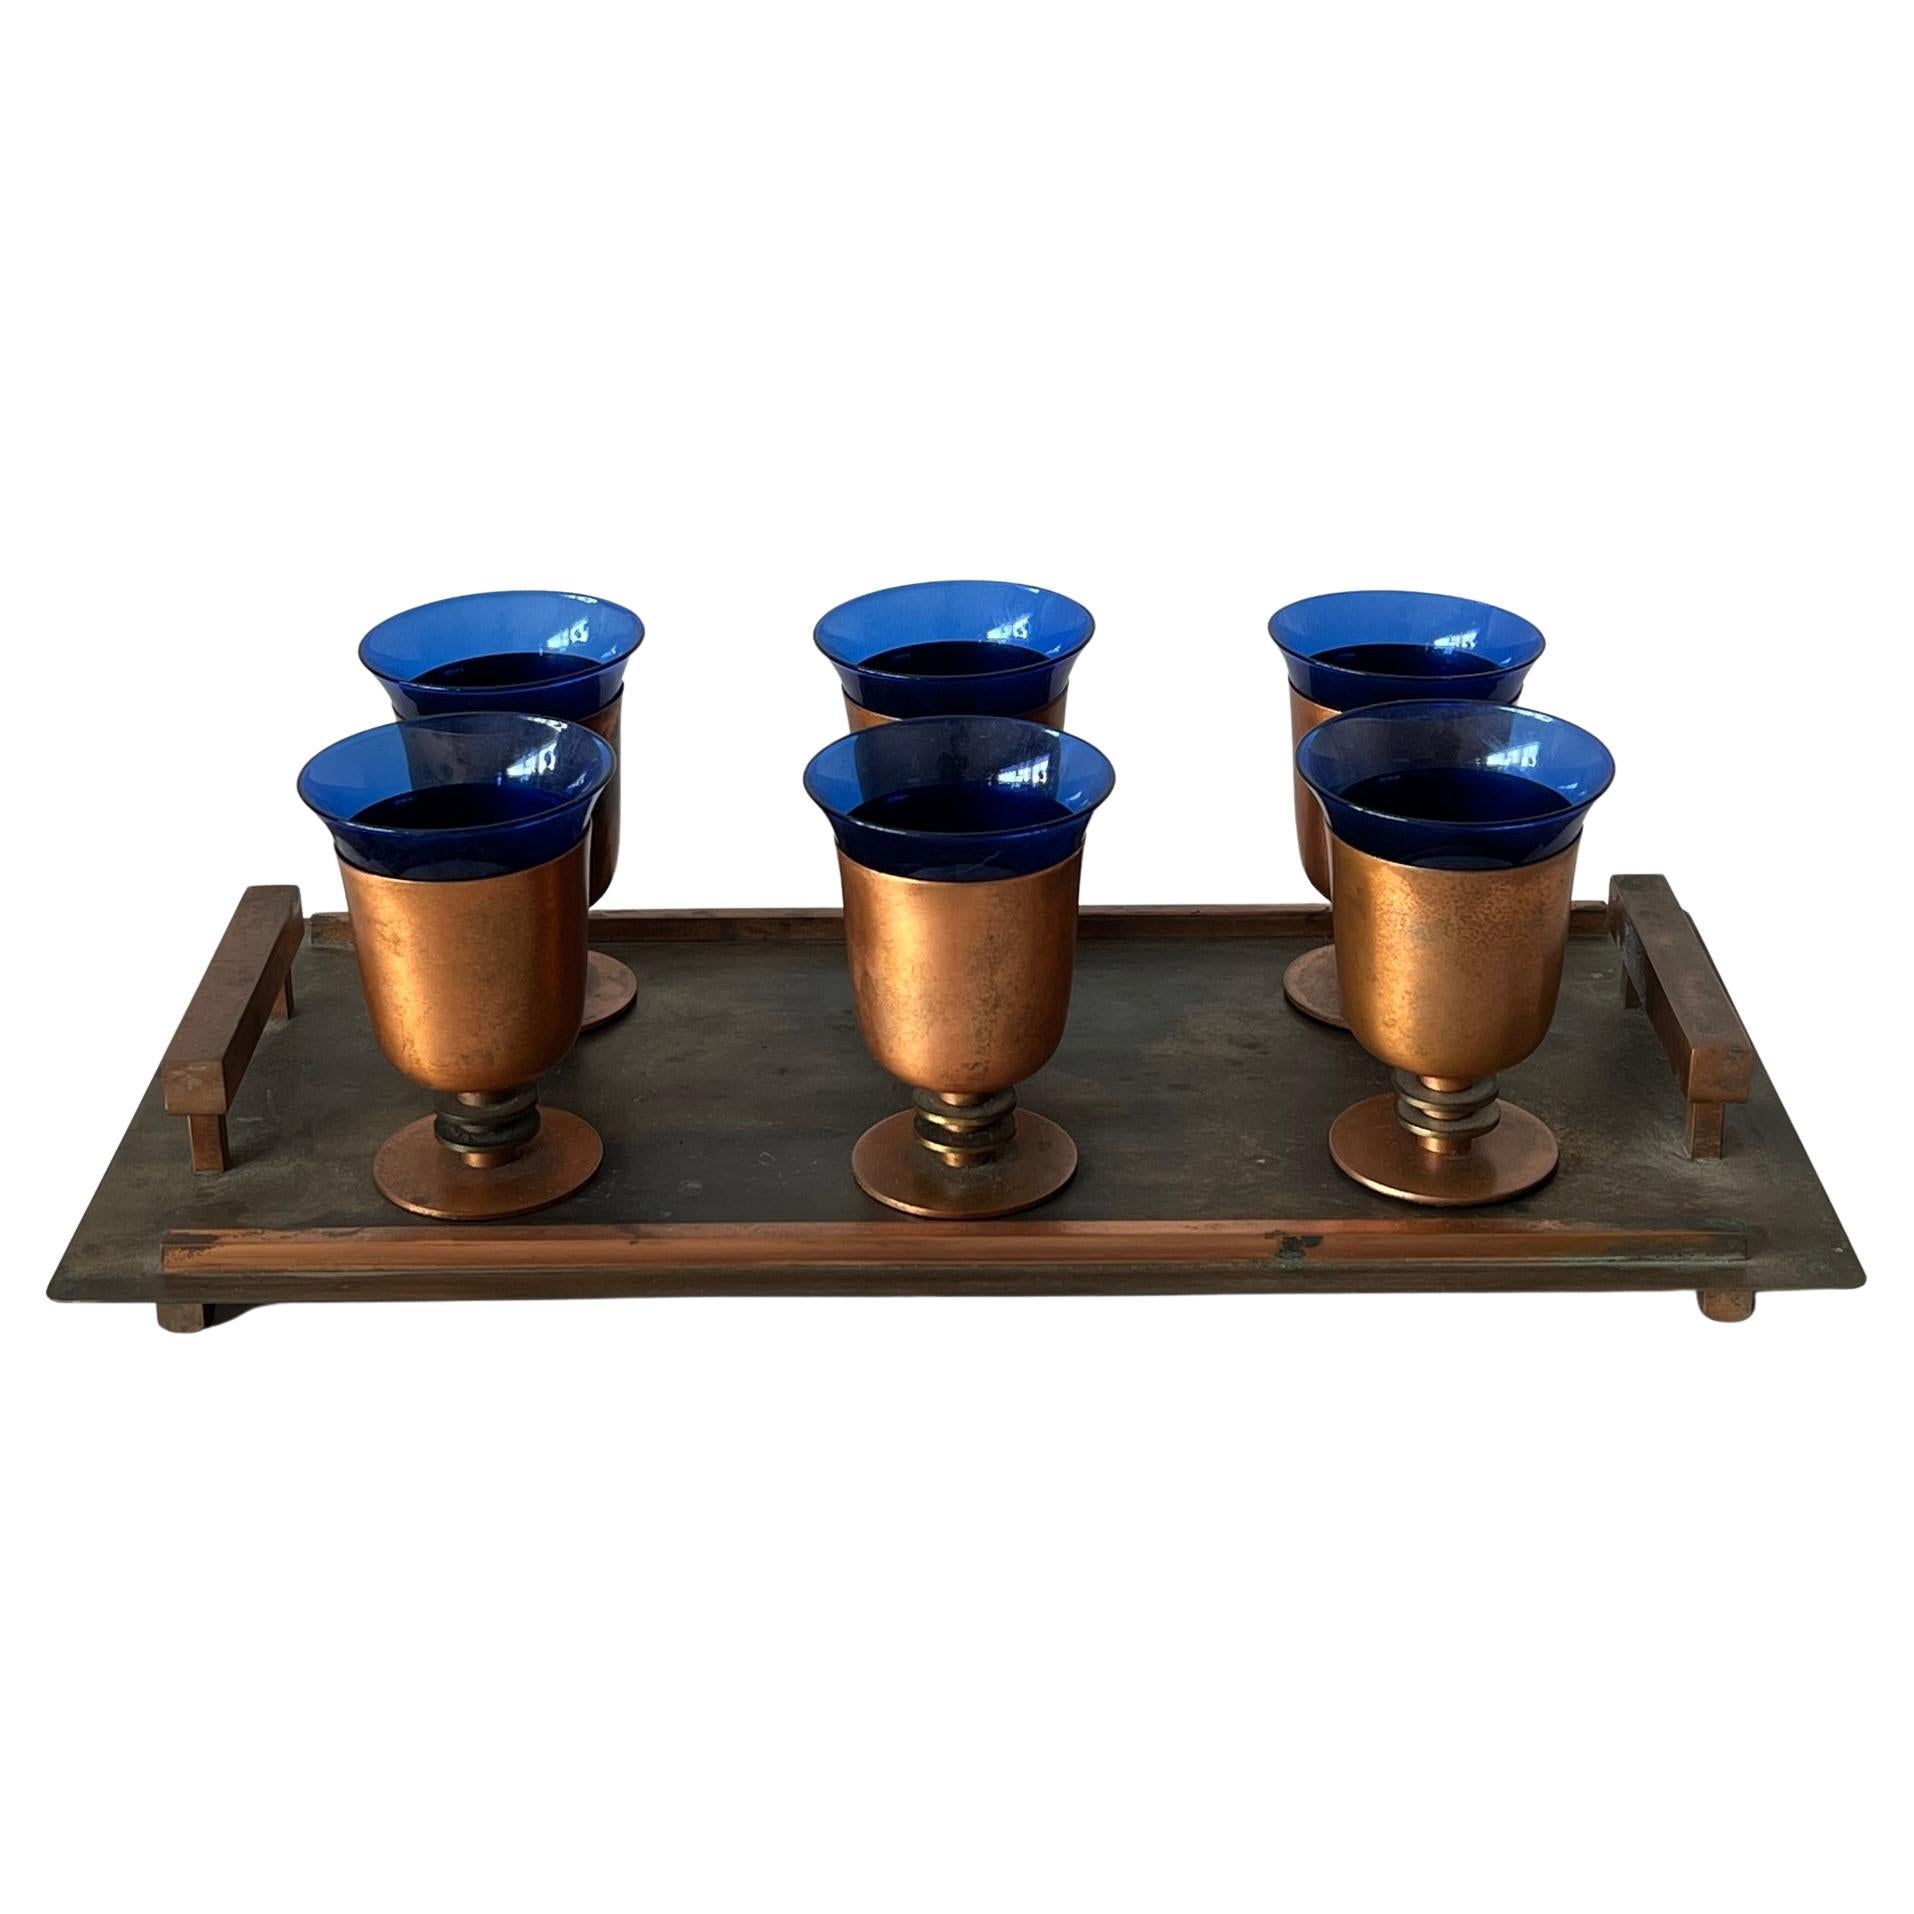 Modernist Art Deco Cobalt Glass and Copper Tray Drink Set For Sale